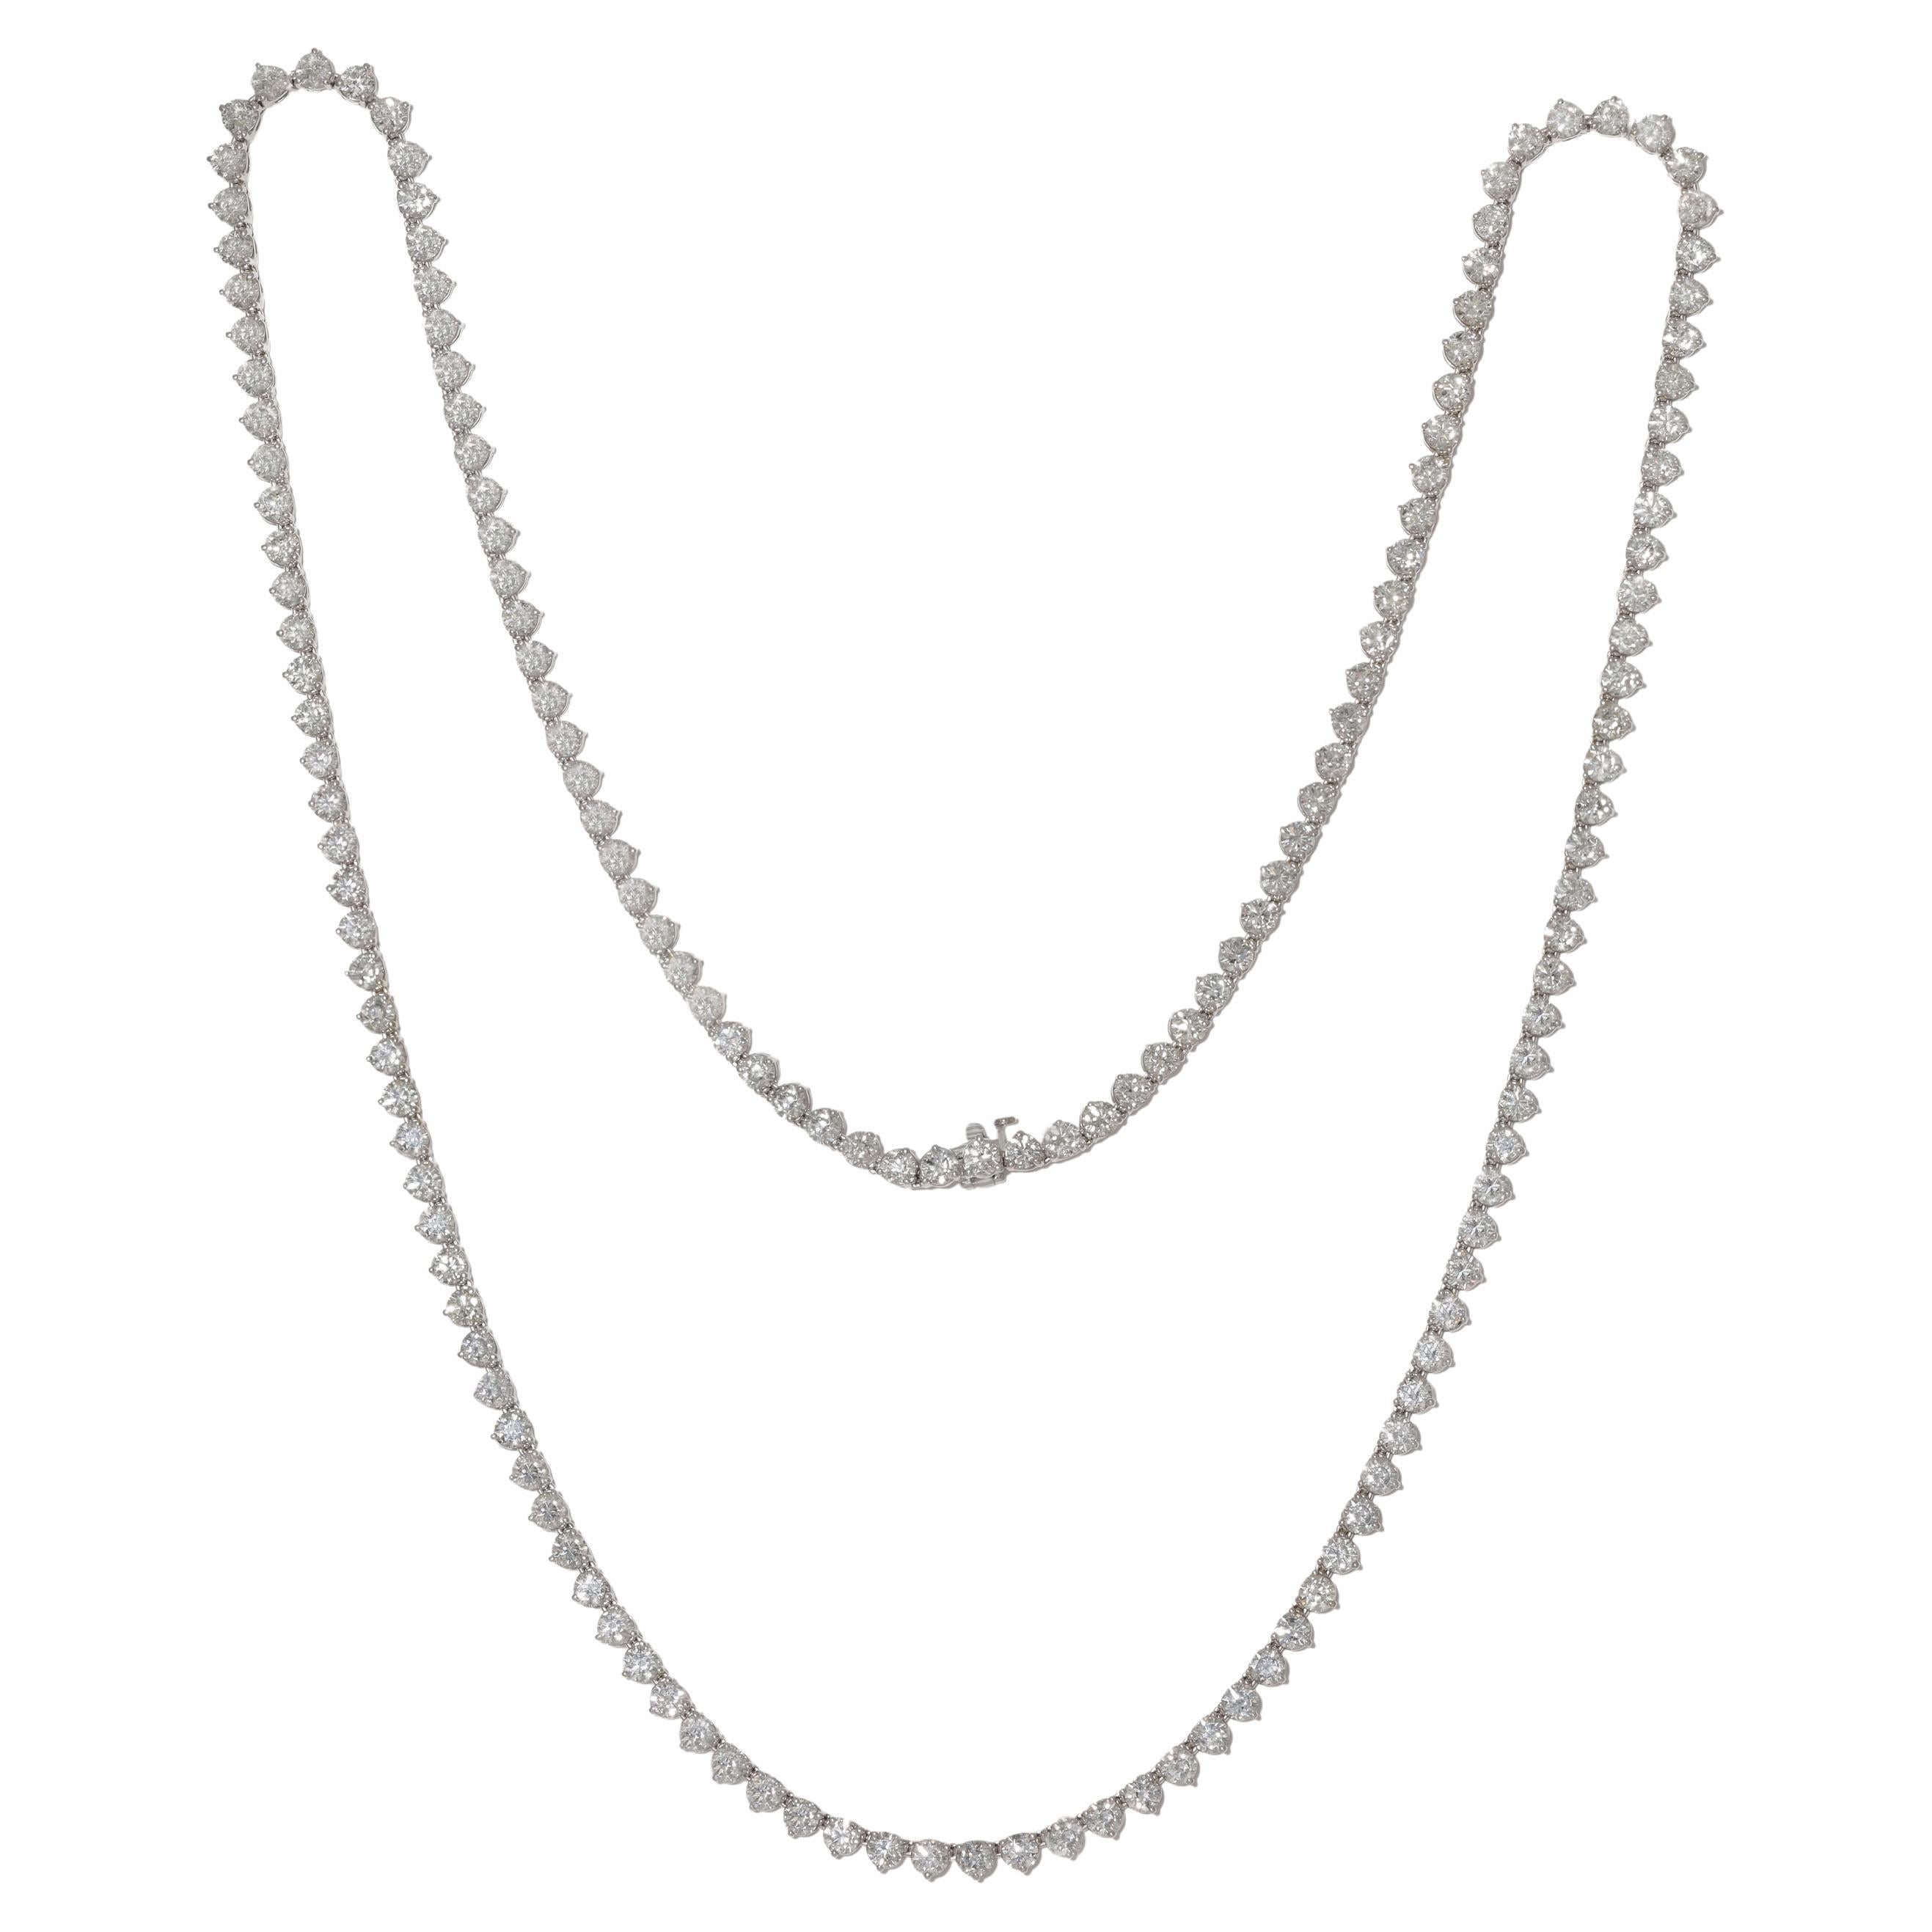 Diana M. Custom 40.00 cts Round  18 k white gold, 32" Diamond Tennis Necklace  For Sale